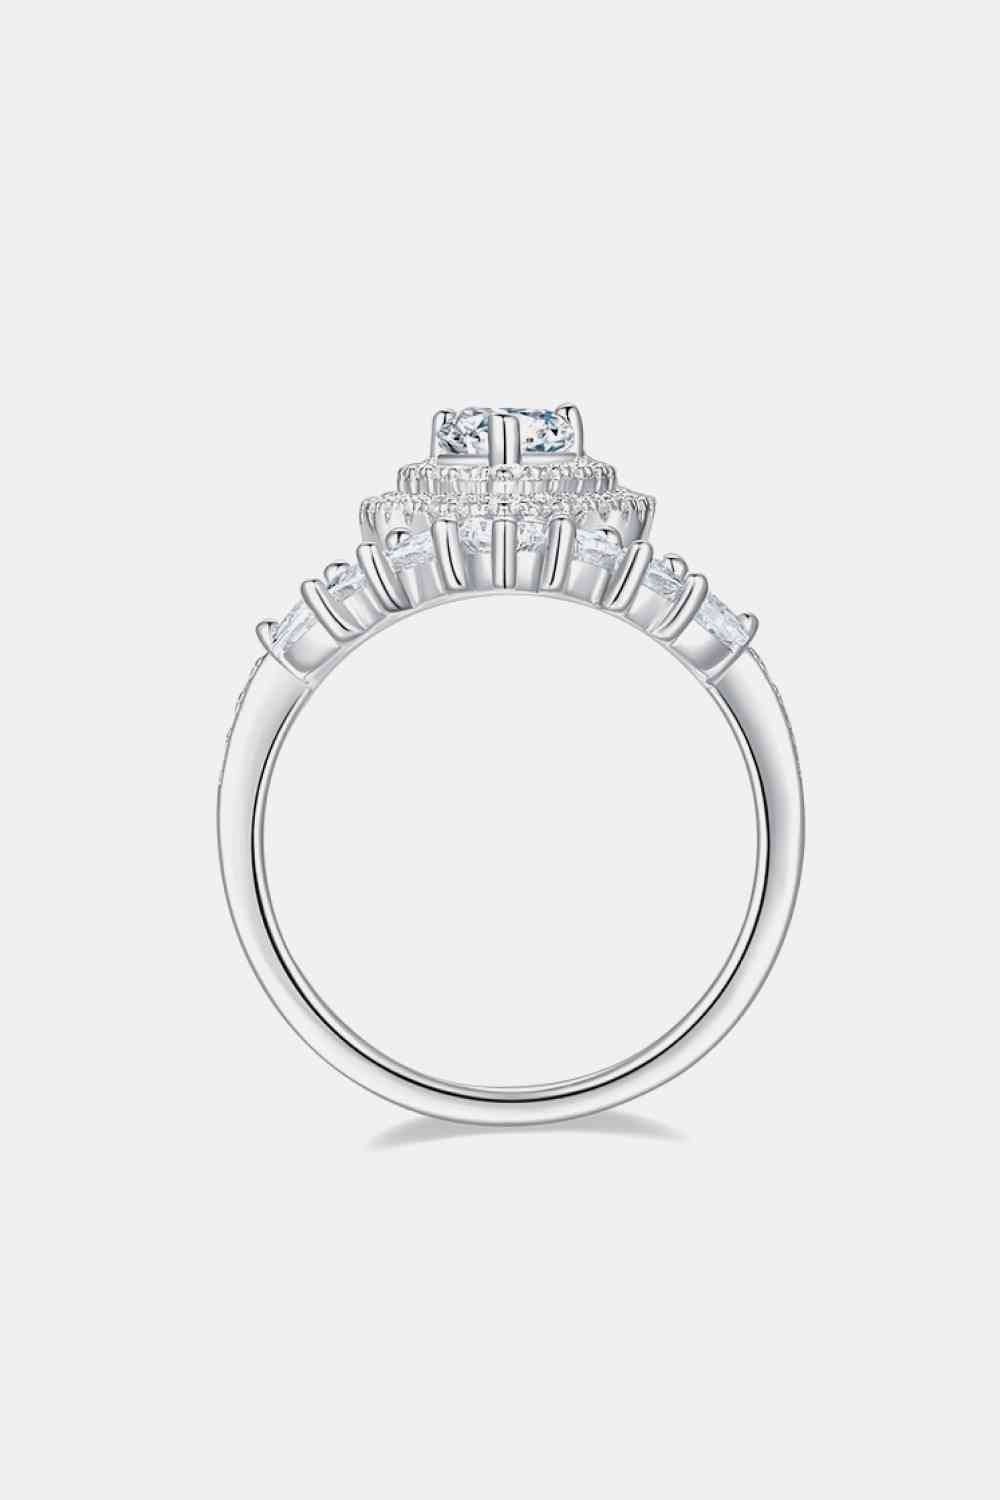 1 Carat Moissanite 925 Sterling Silver Crown Ring - AllIn Computer